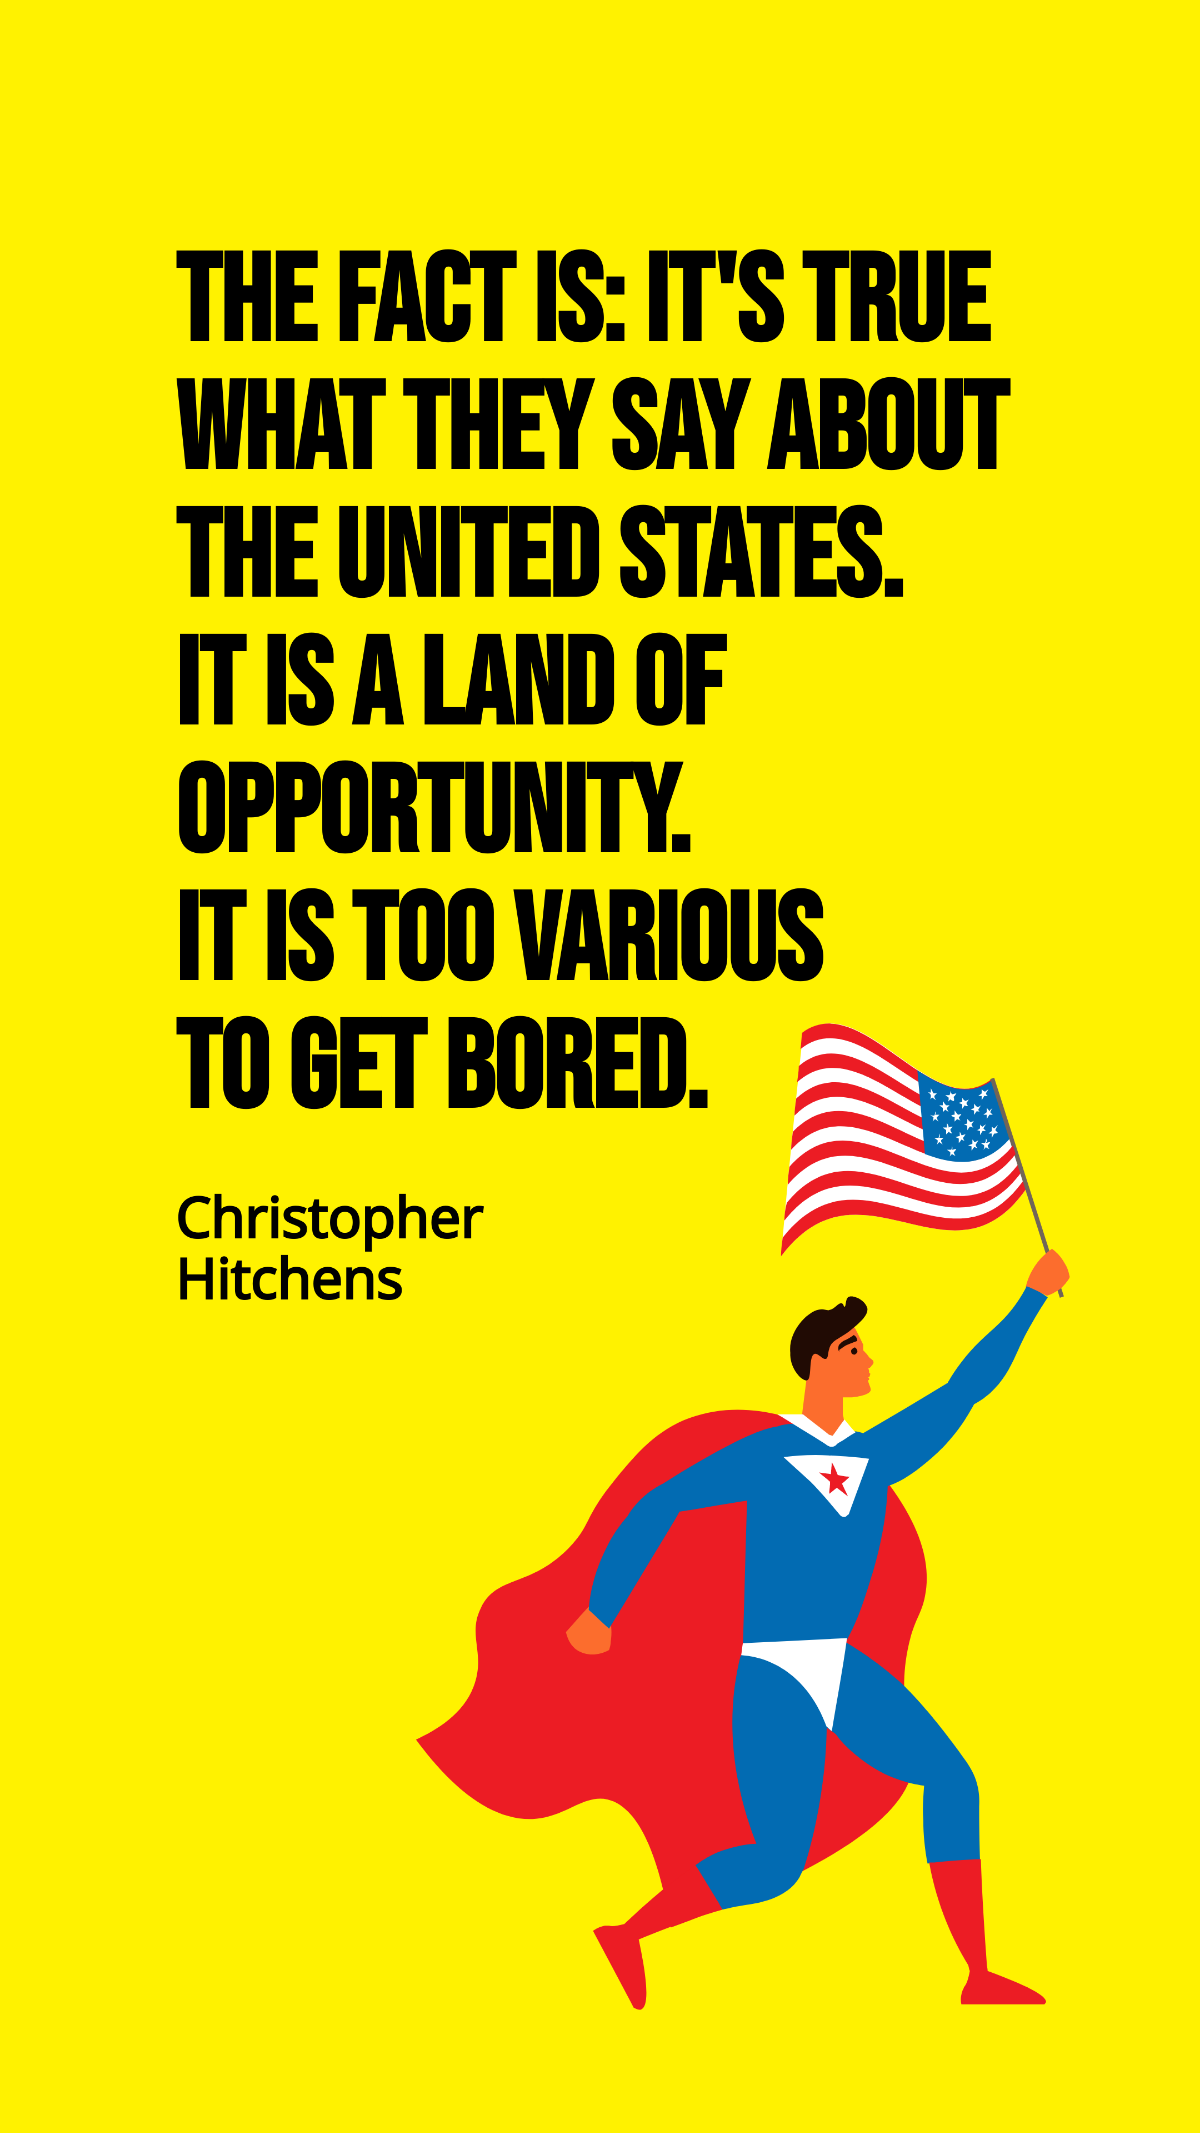 Christopher Hitchens - The fact is: It's true what they say about the United States. It is a land of opportunity. It is too various to get bored Template